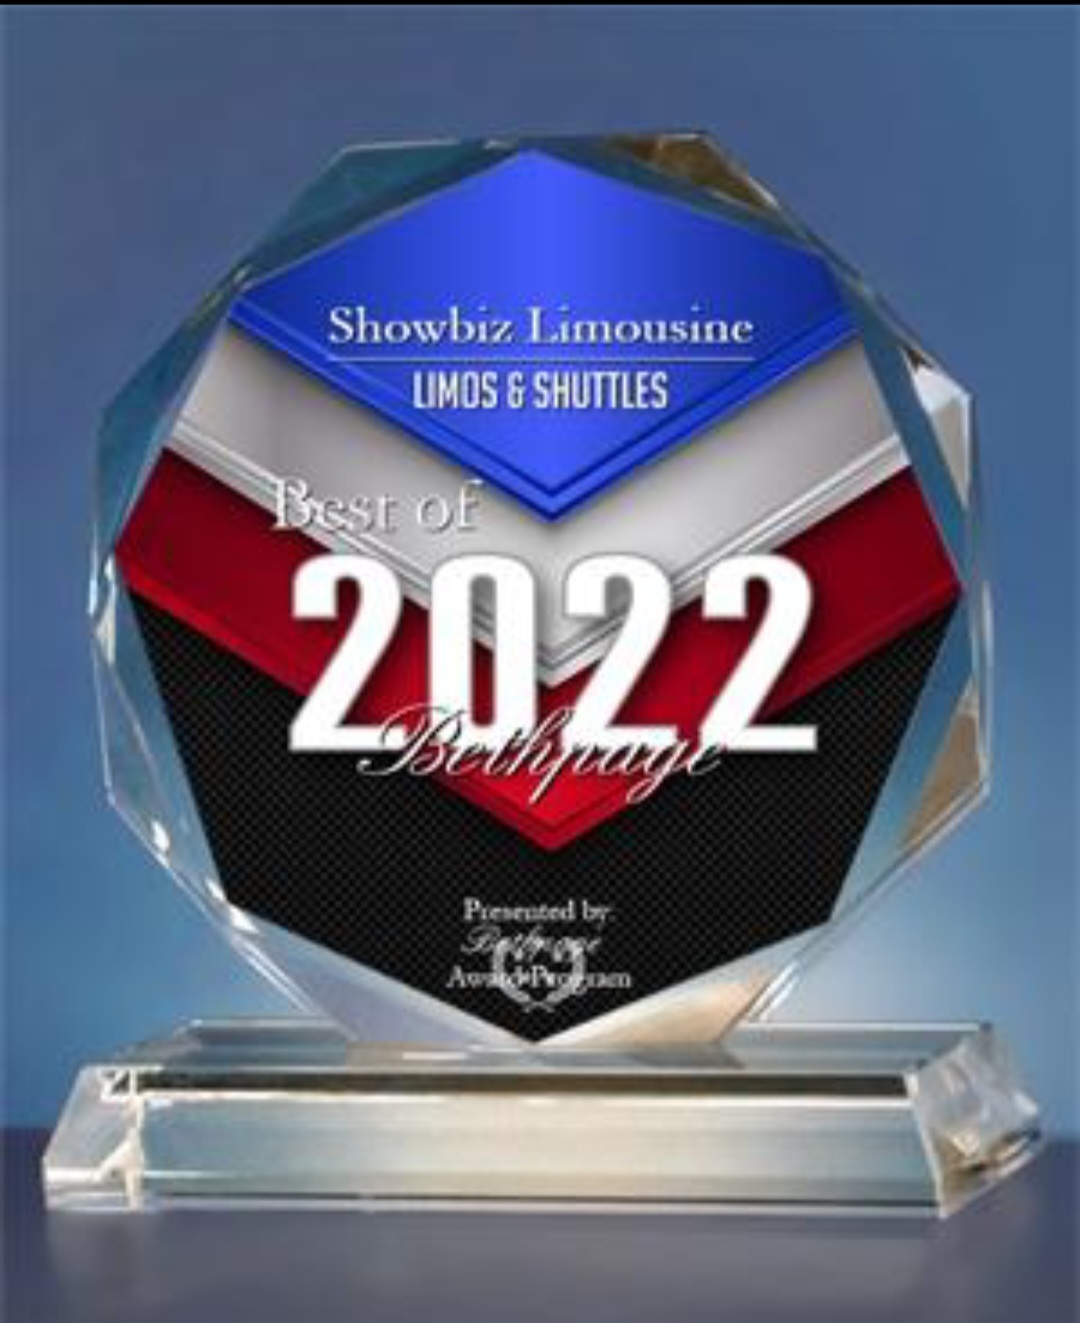 Best of 2022 Award for Limousine Service in Long Island